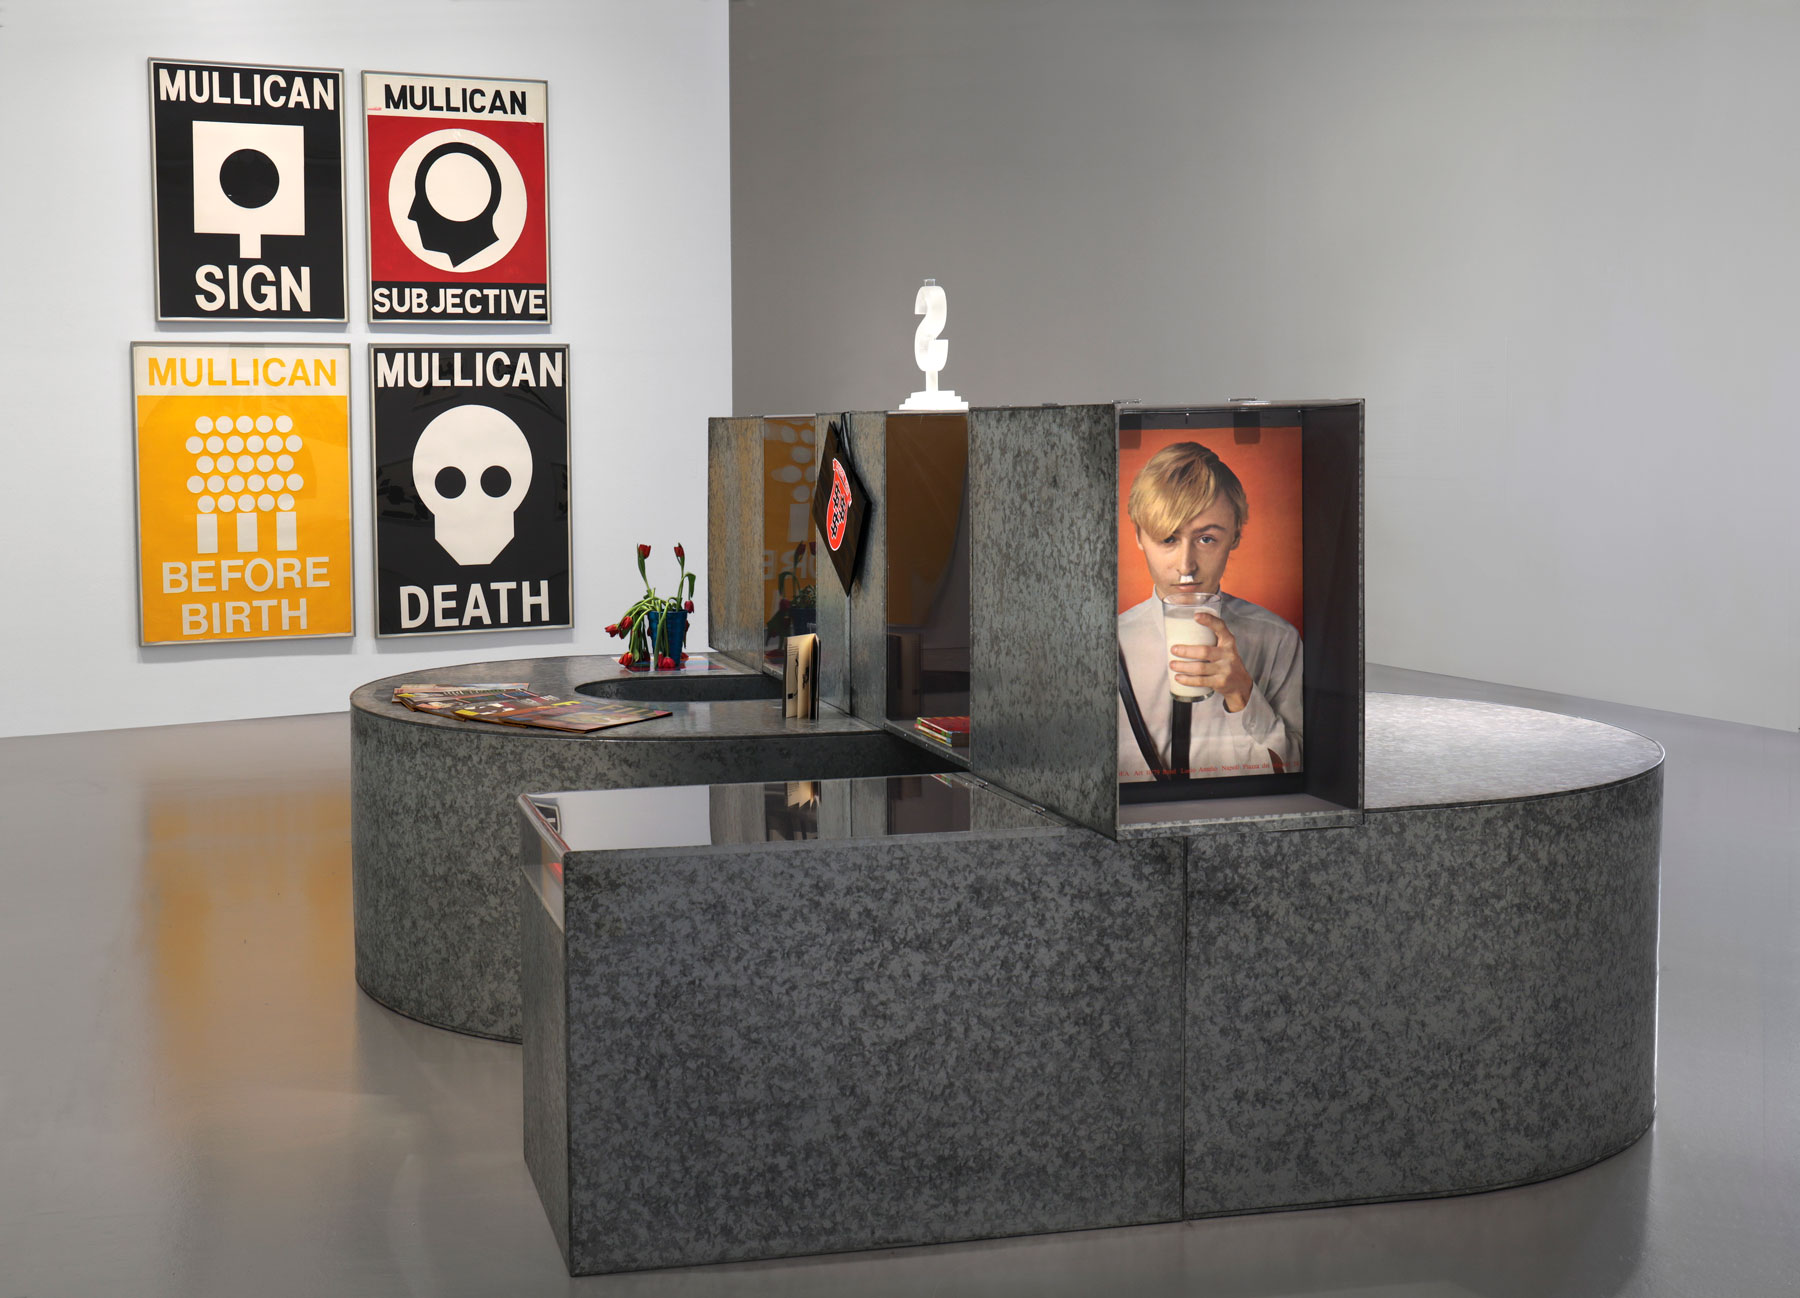 Installation view with works by Matt Mullican and General Idea. Photo: Cathy Carver, Hirshhorn Museum